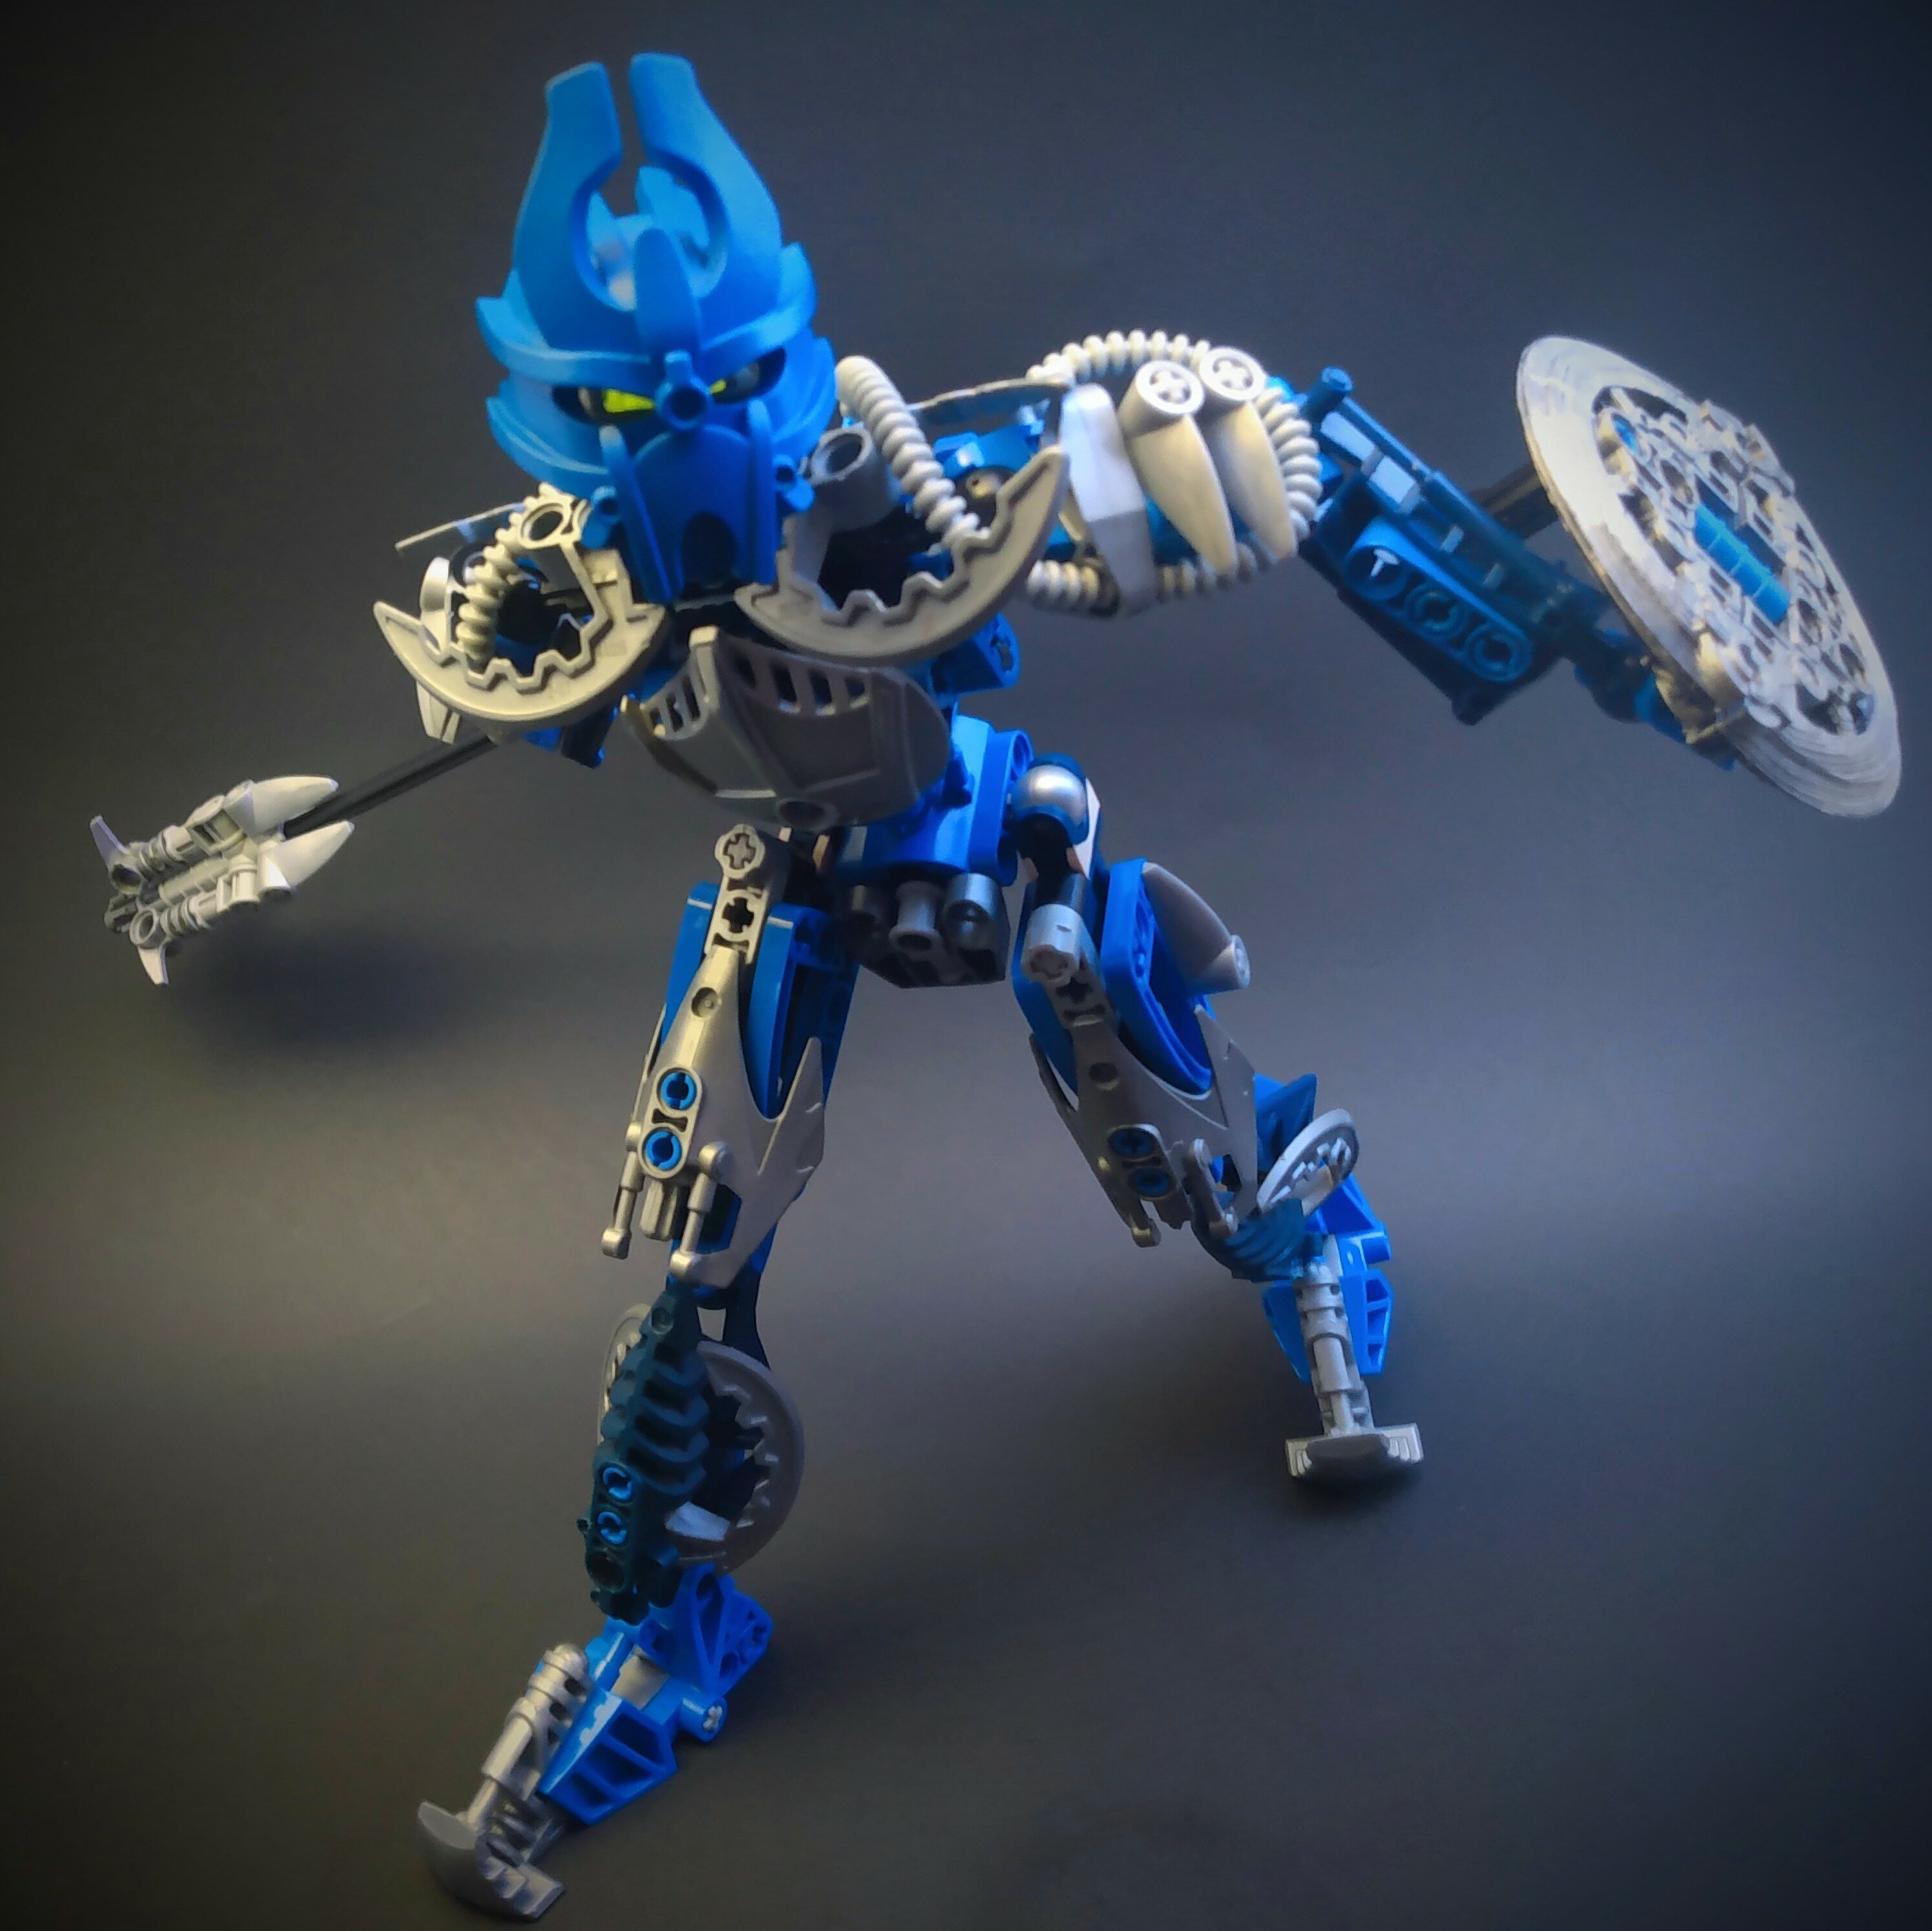 BIONICLE Canon Contest #1: The First 